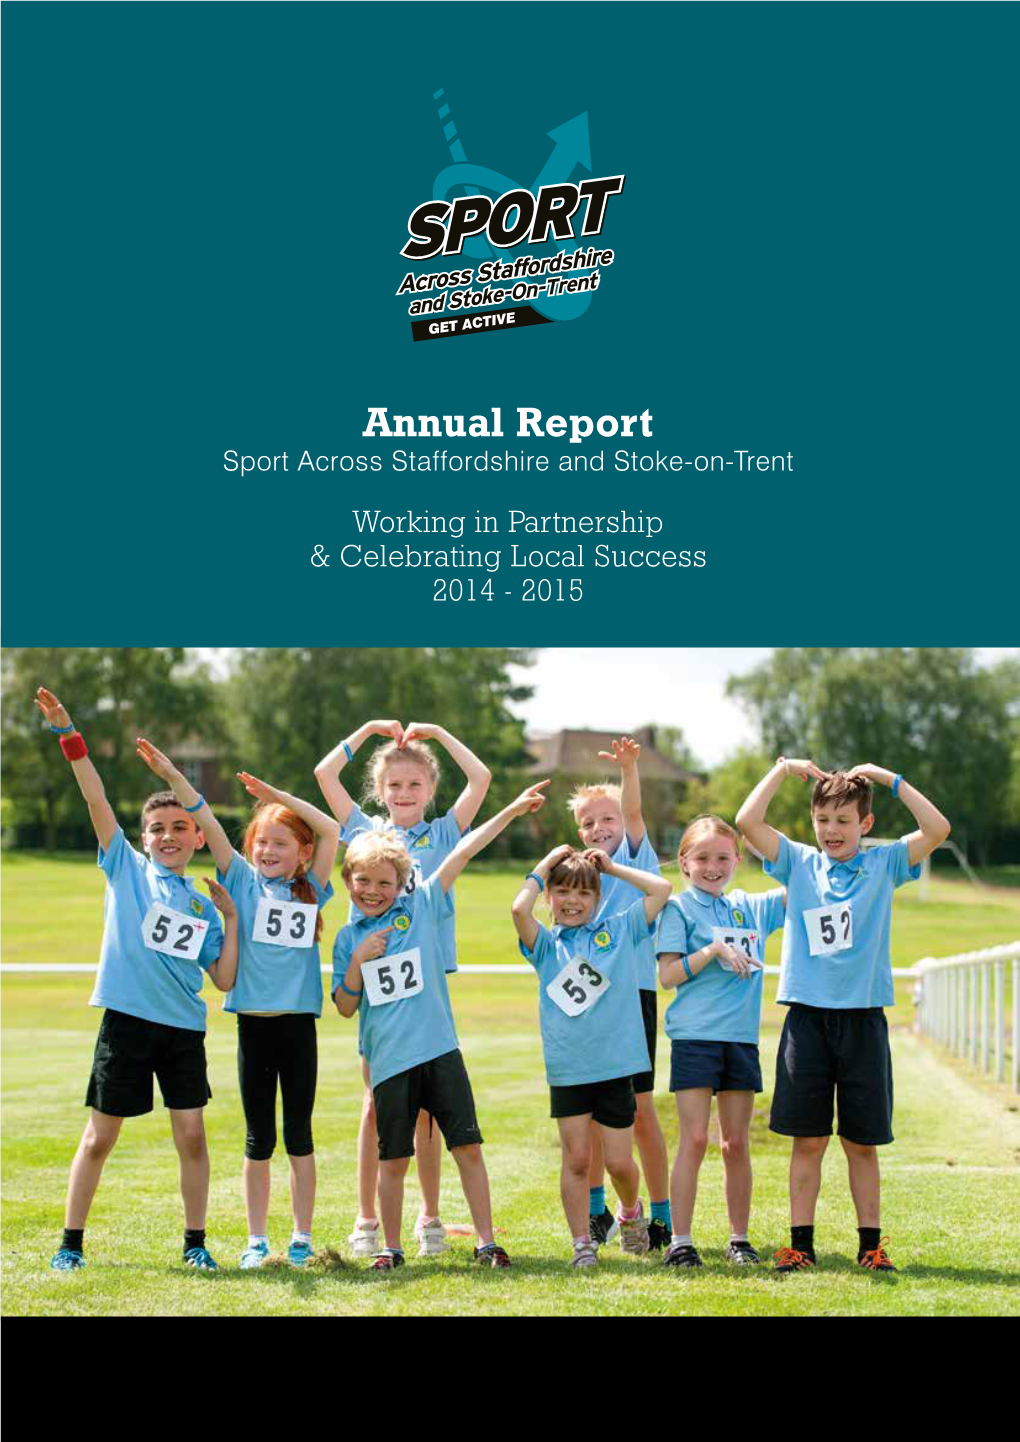 Annual Report Sport Across Staffordshire and Stoke-On-Trent